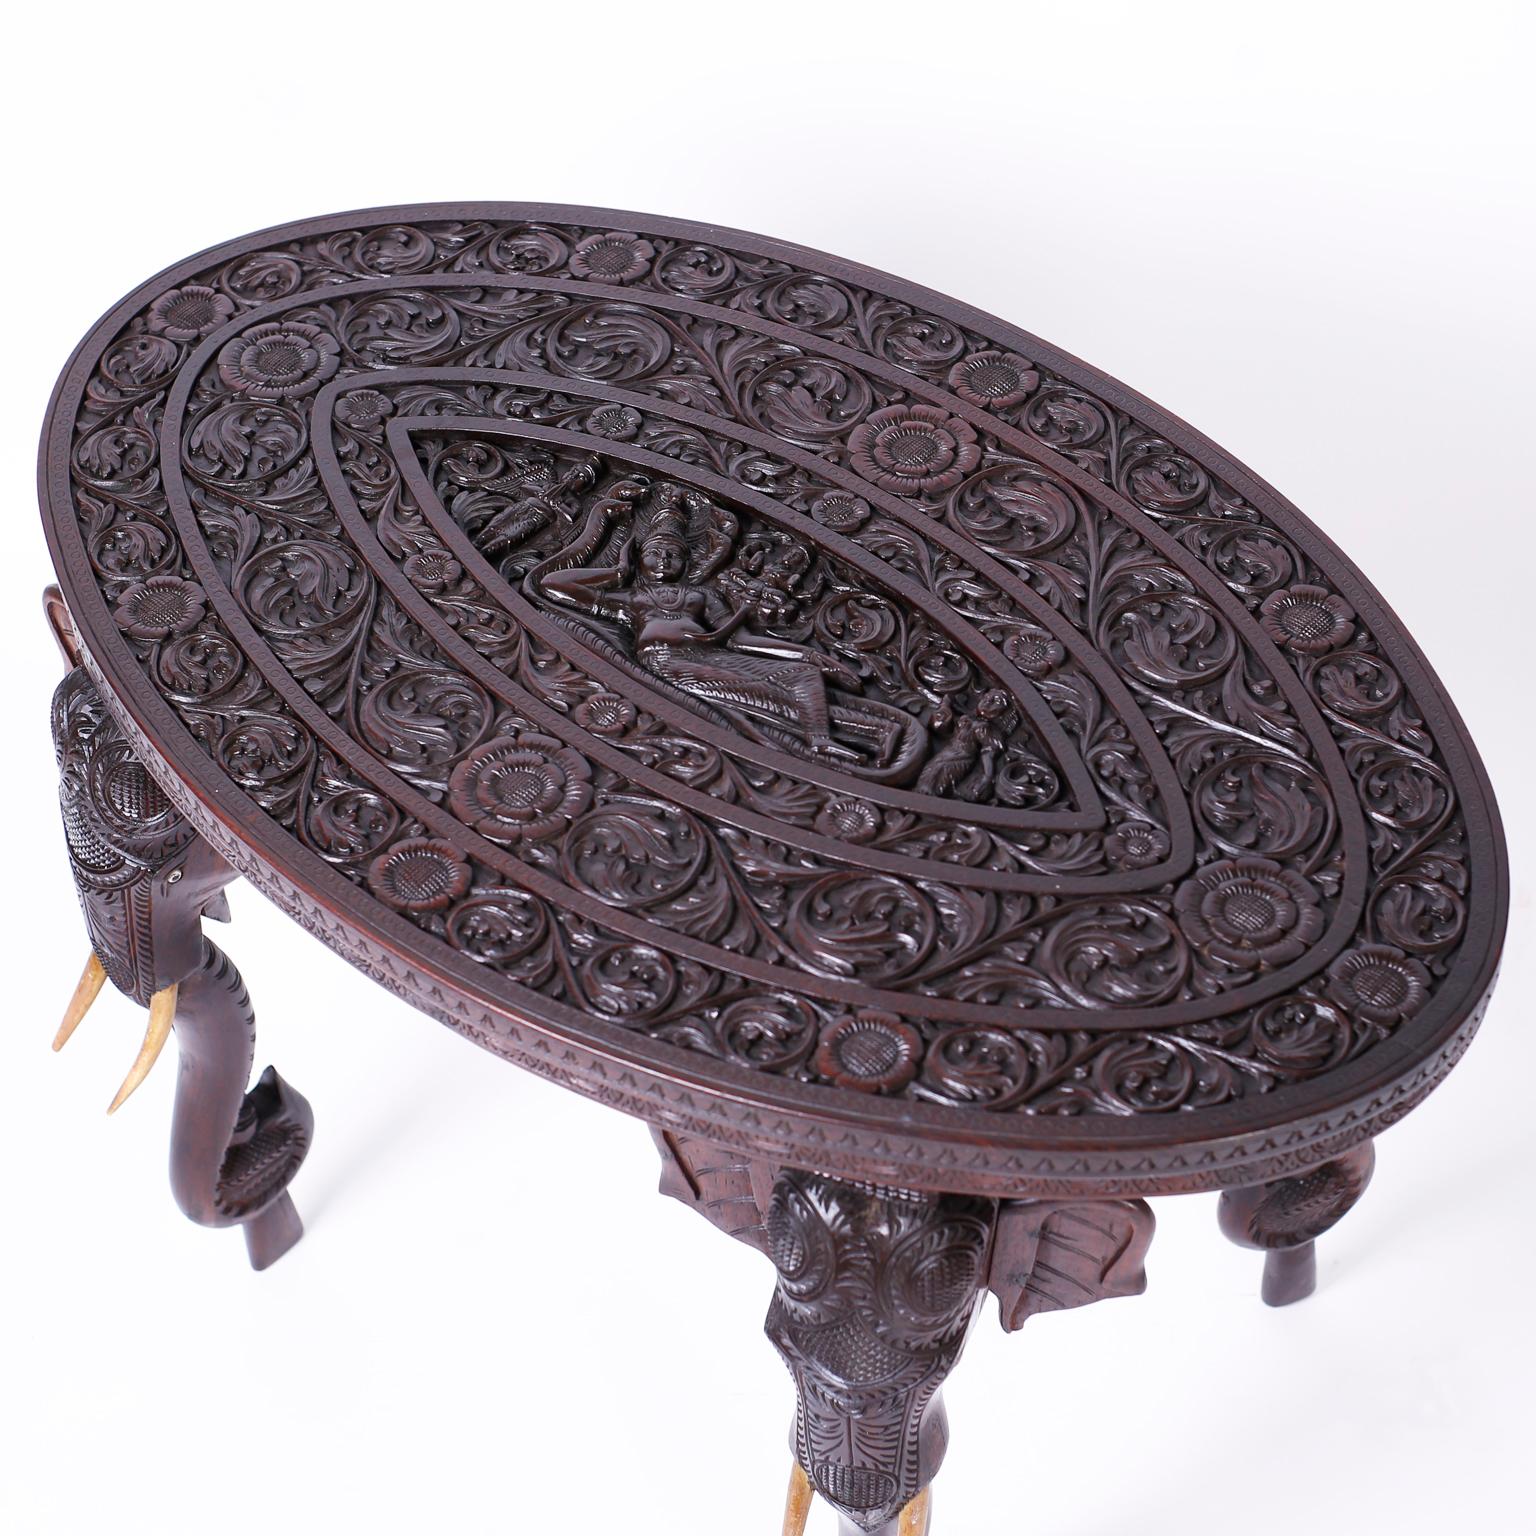 Anglo-Indian Style Thai Elephant Table 1